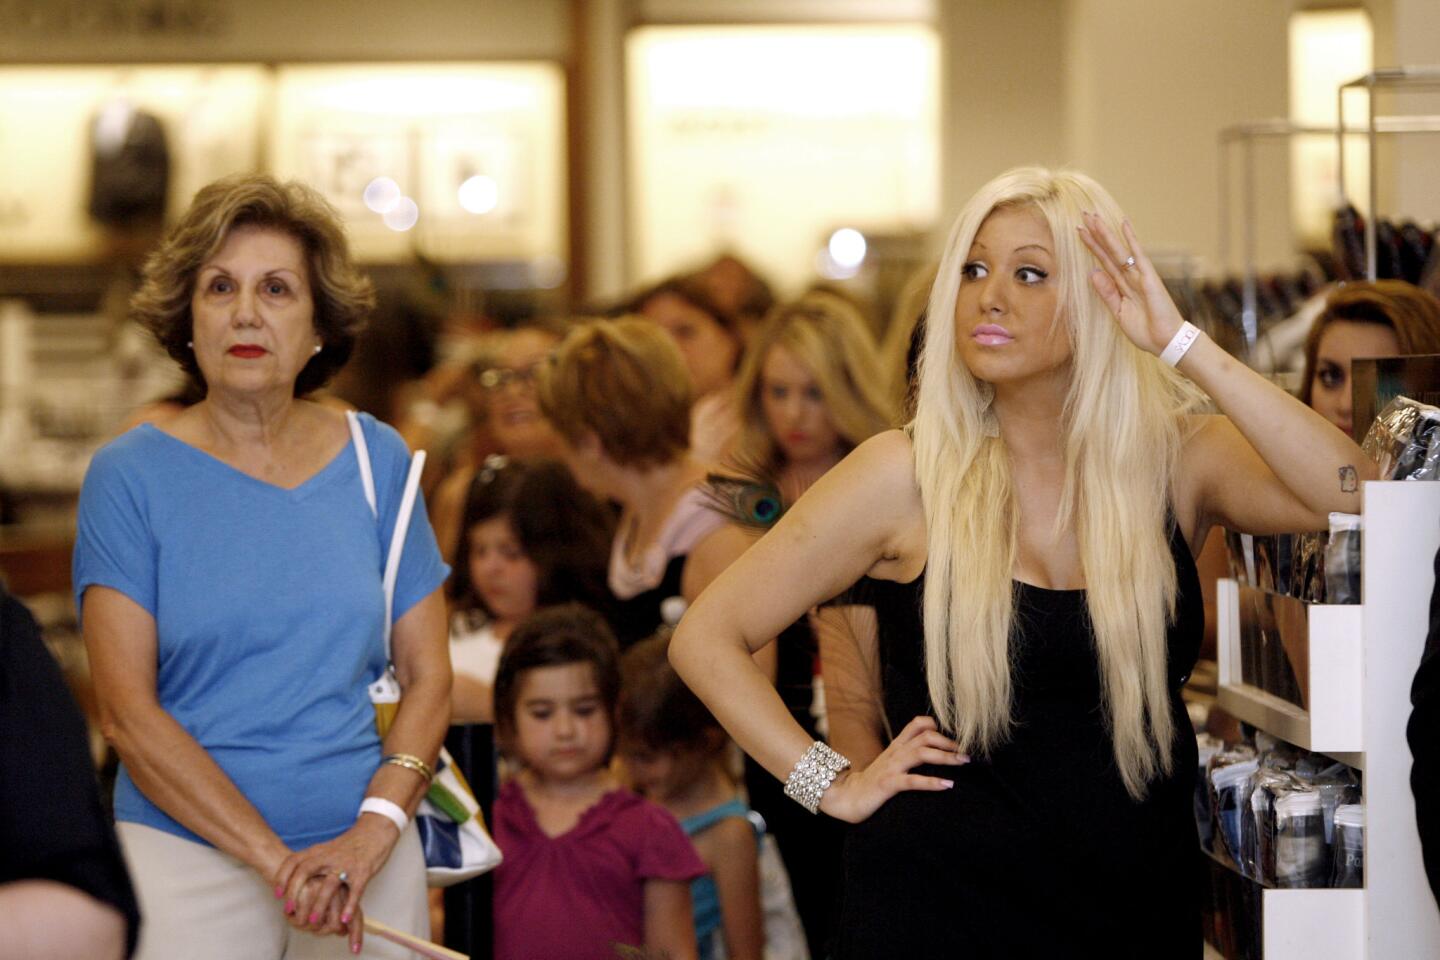 Photo Gallery: TV star Nicole Richie makes appearance at Glendale Galleria Macy's